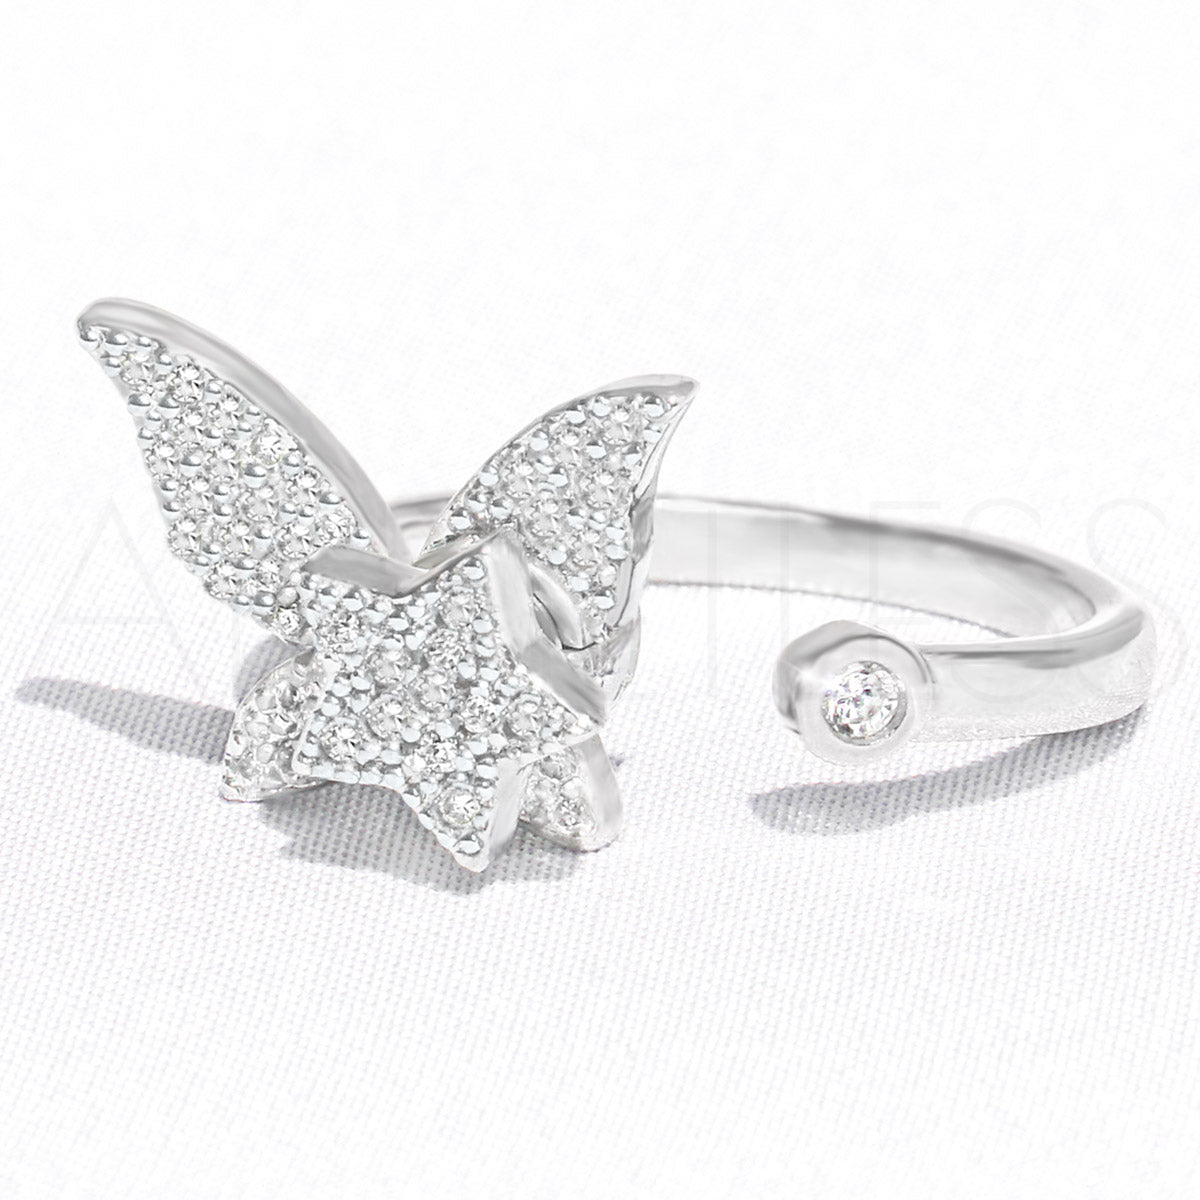 Silver butterfly anxiety ring with star charm, adjustable size, on white background